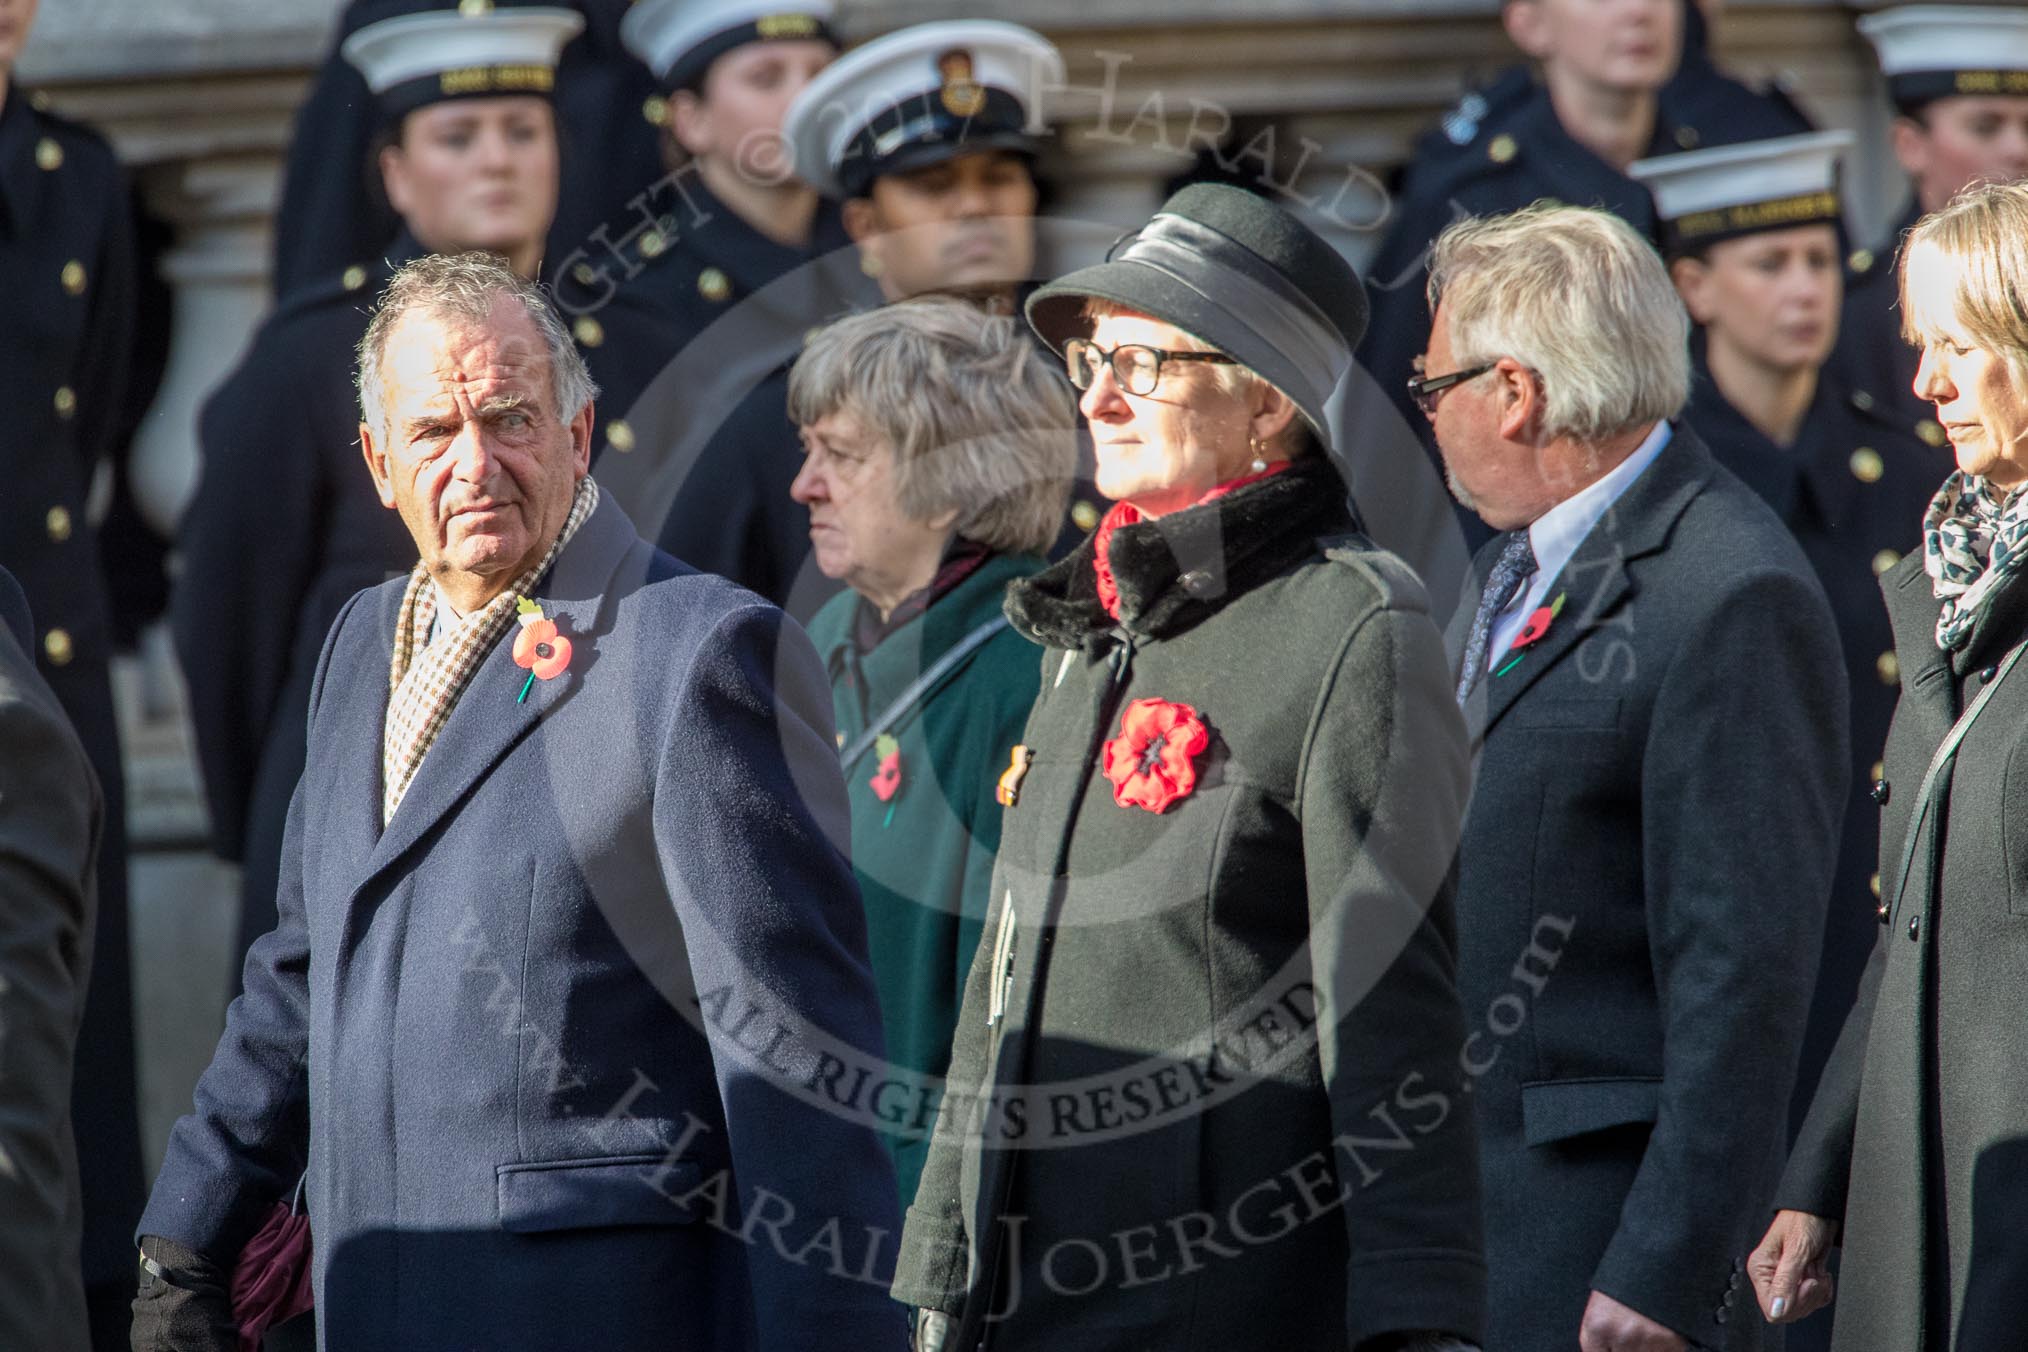 WRVS / RVS (Group M8, 19 members) during the Royal British Legion March Past on Remembrance Sunday at the Cenotaph, Whitehall, Westminster, London, 11 November 2018, 12:26.